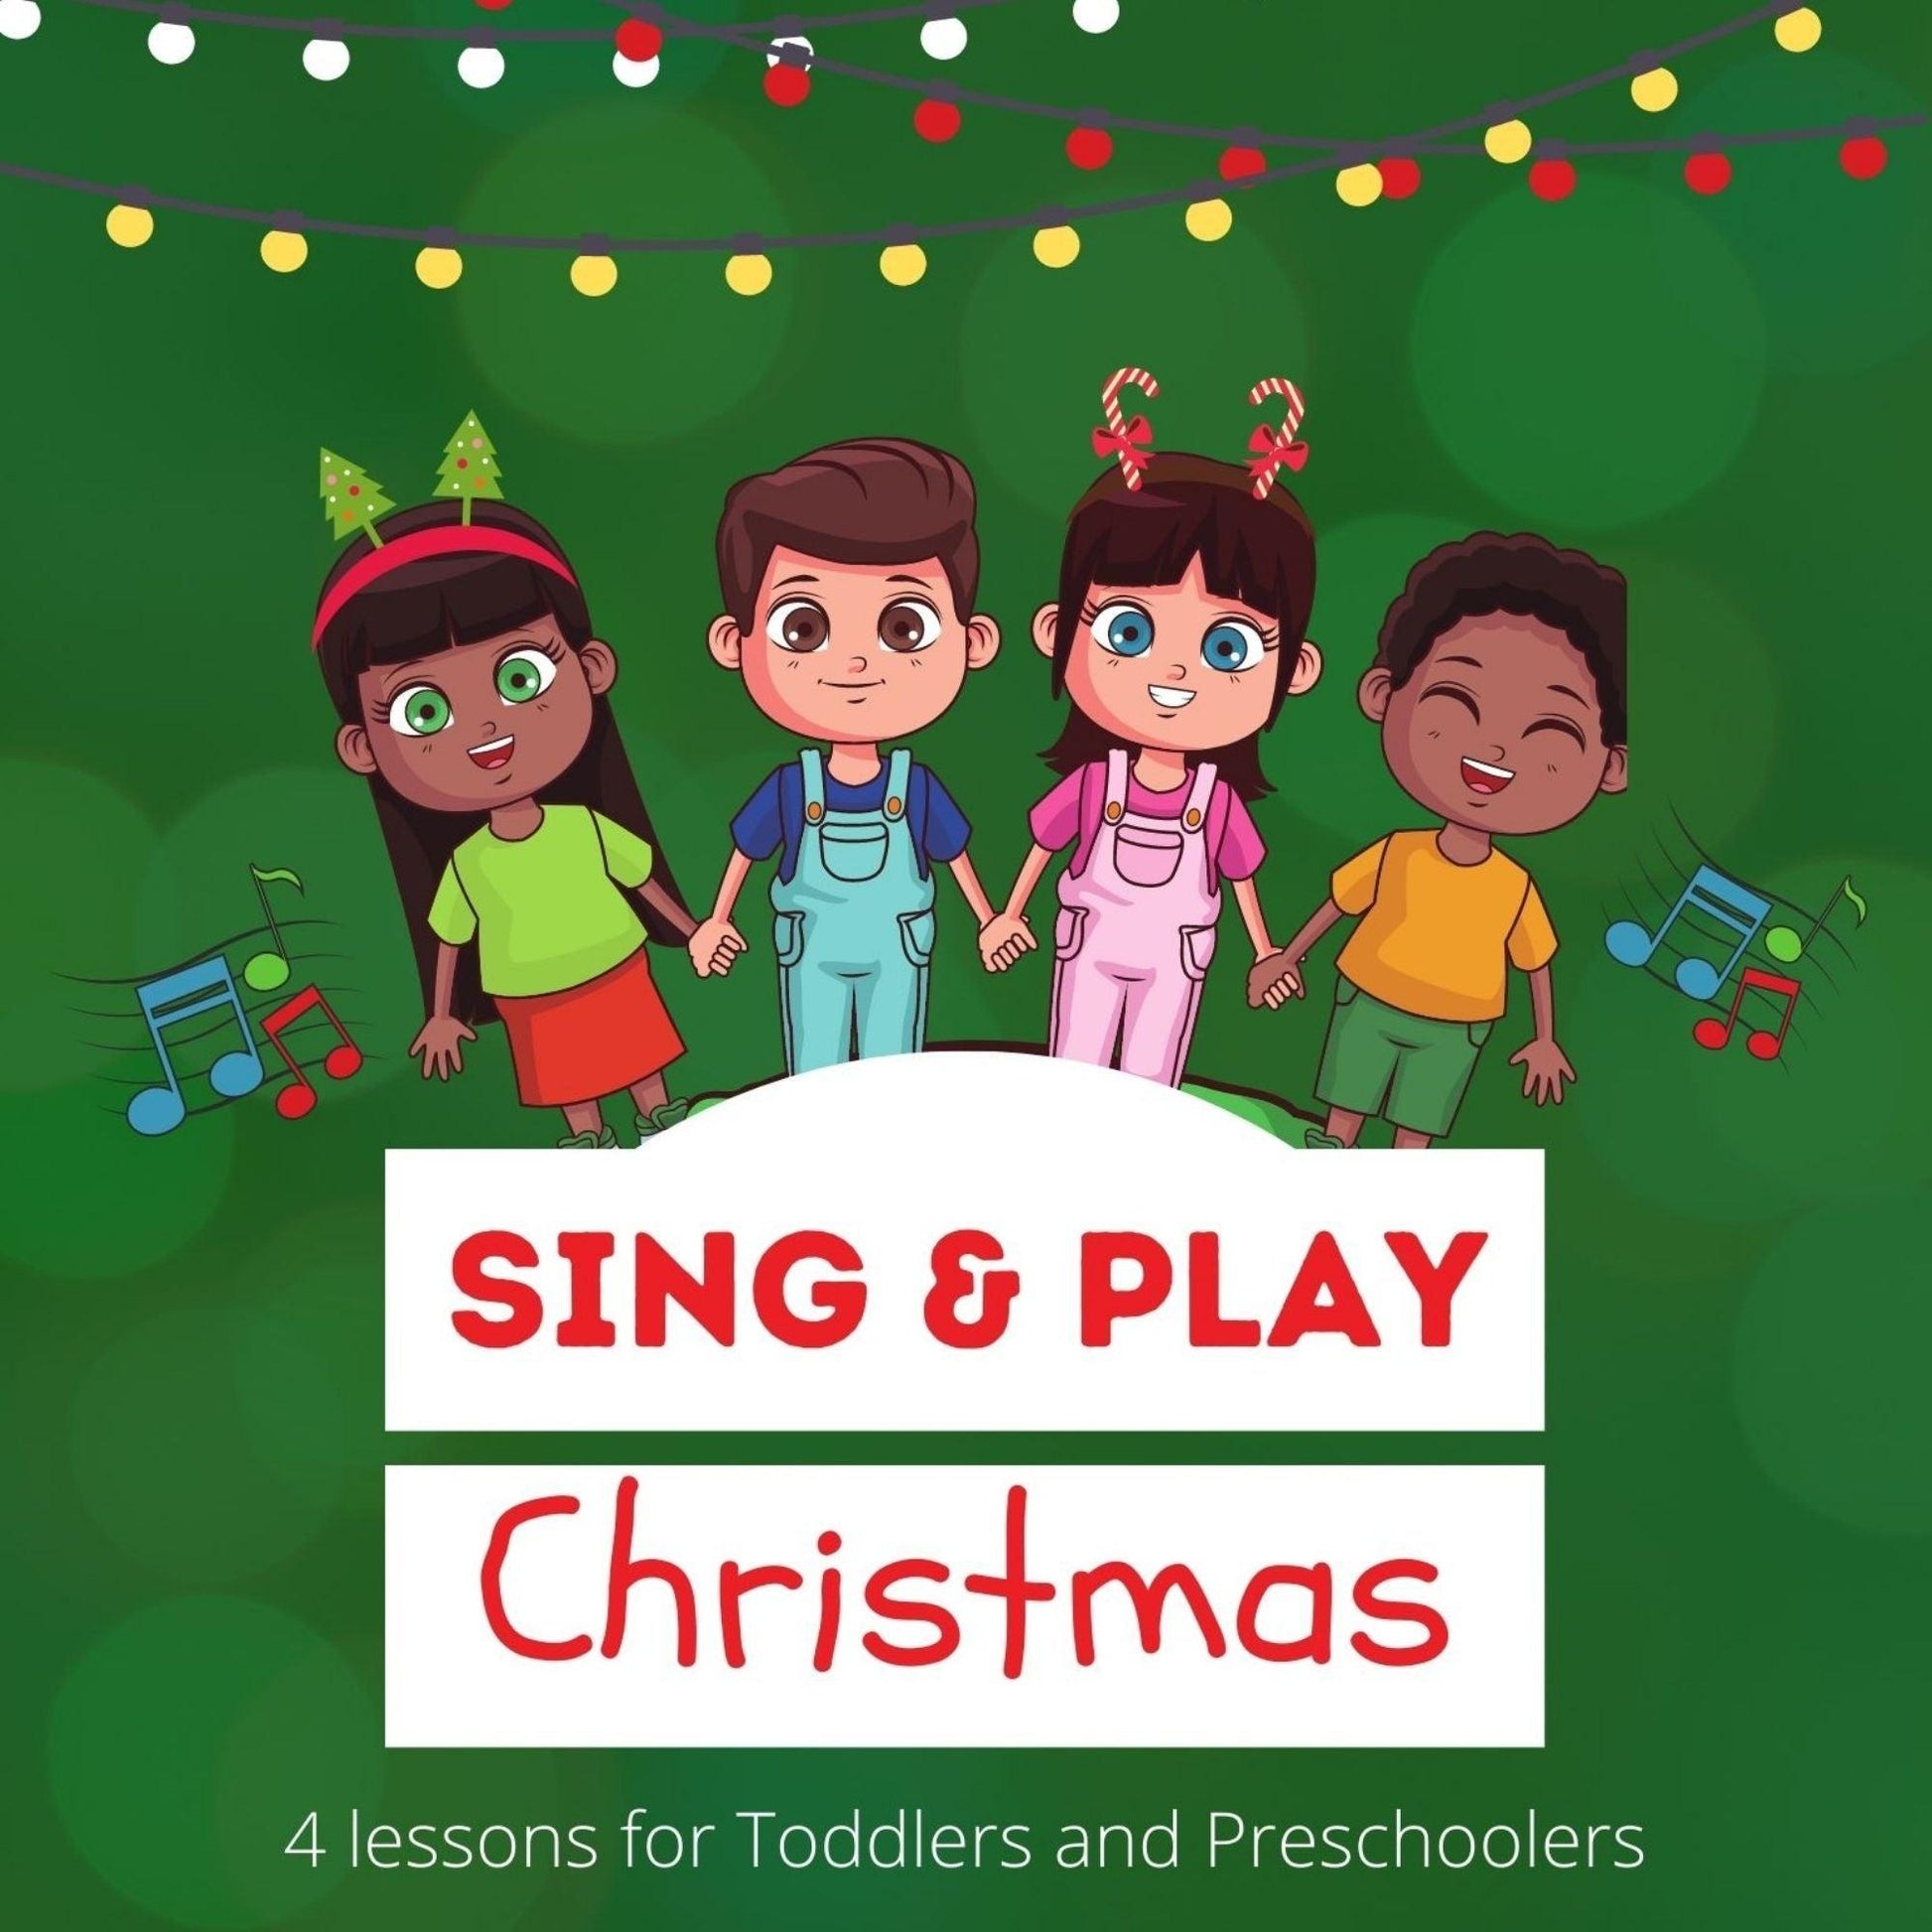 Sing and Play Christmas: 4Lessons for Preschool and Toddlers (download only) - Sunday School Store 